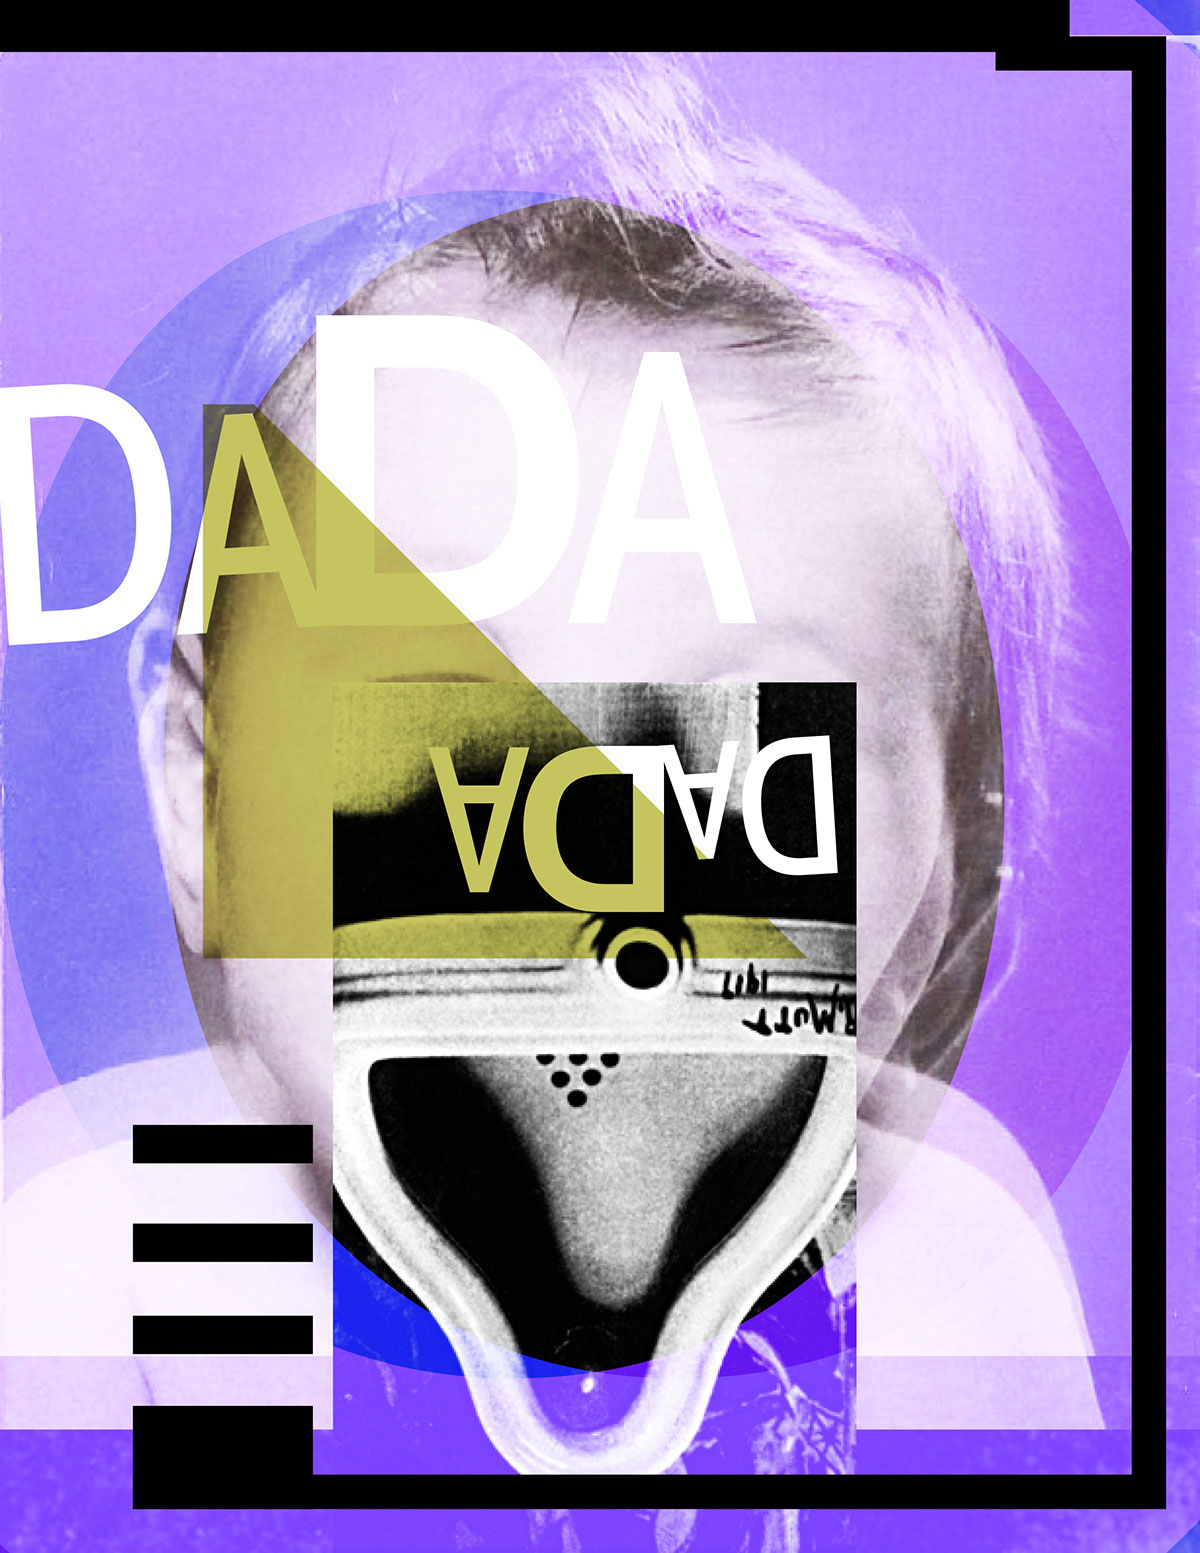 Dada Type and Image color risd